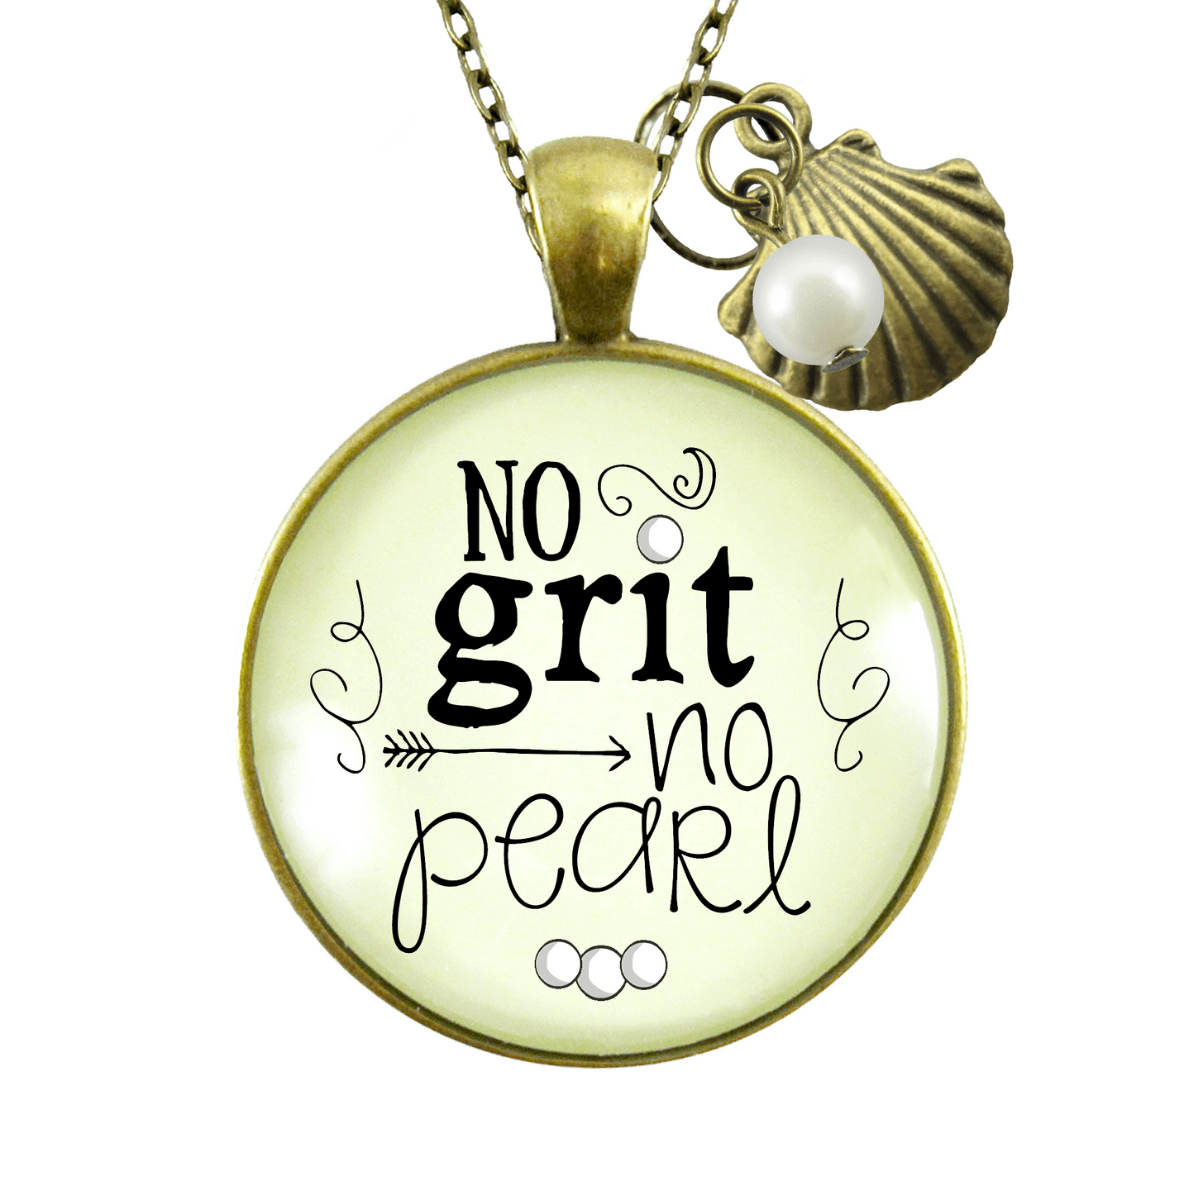 Gutsy Goodness No Grit No Pearl Strength Necklace Southern Inspired Saying Jewelry - Gutsy Goodness;No Grit No Pearl Strength Necklace Southern Inspired Saying Jewelry - Gutsy Goodness Handmade Jewelry Gifts